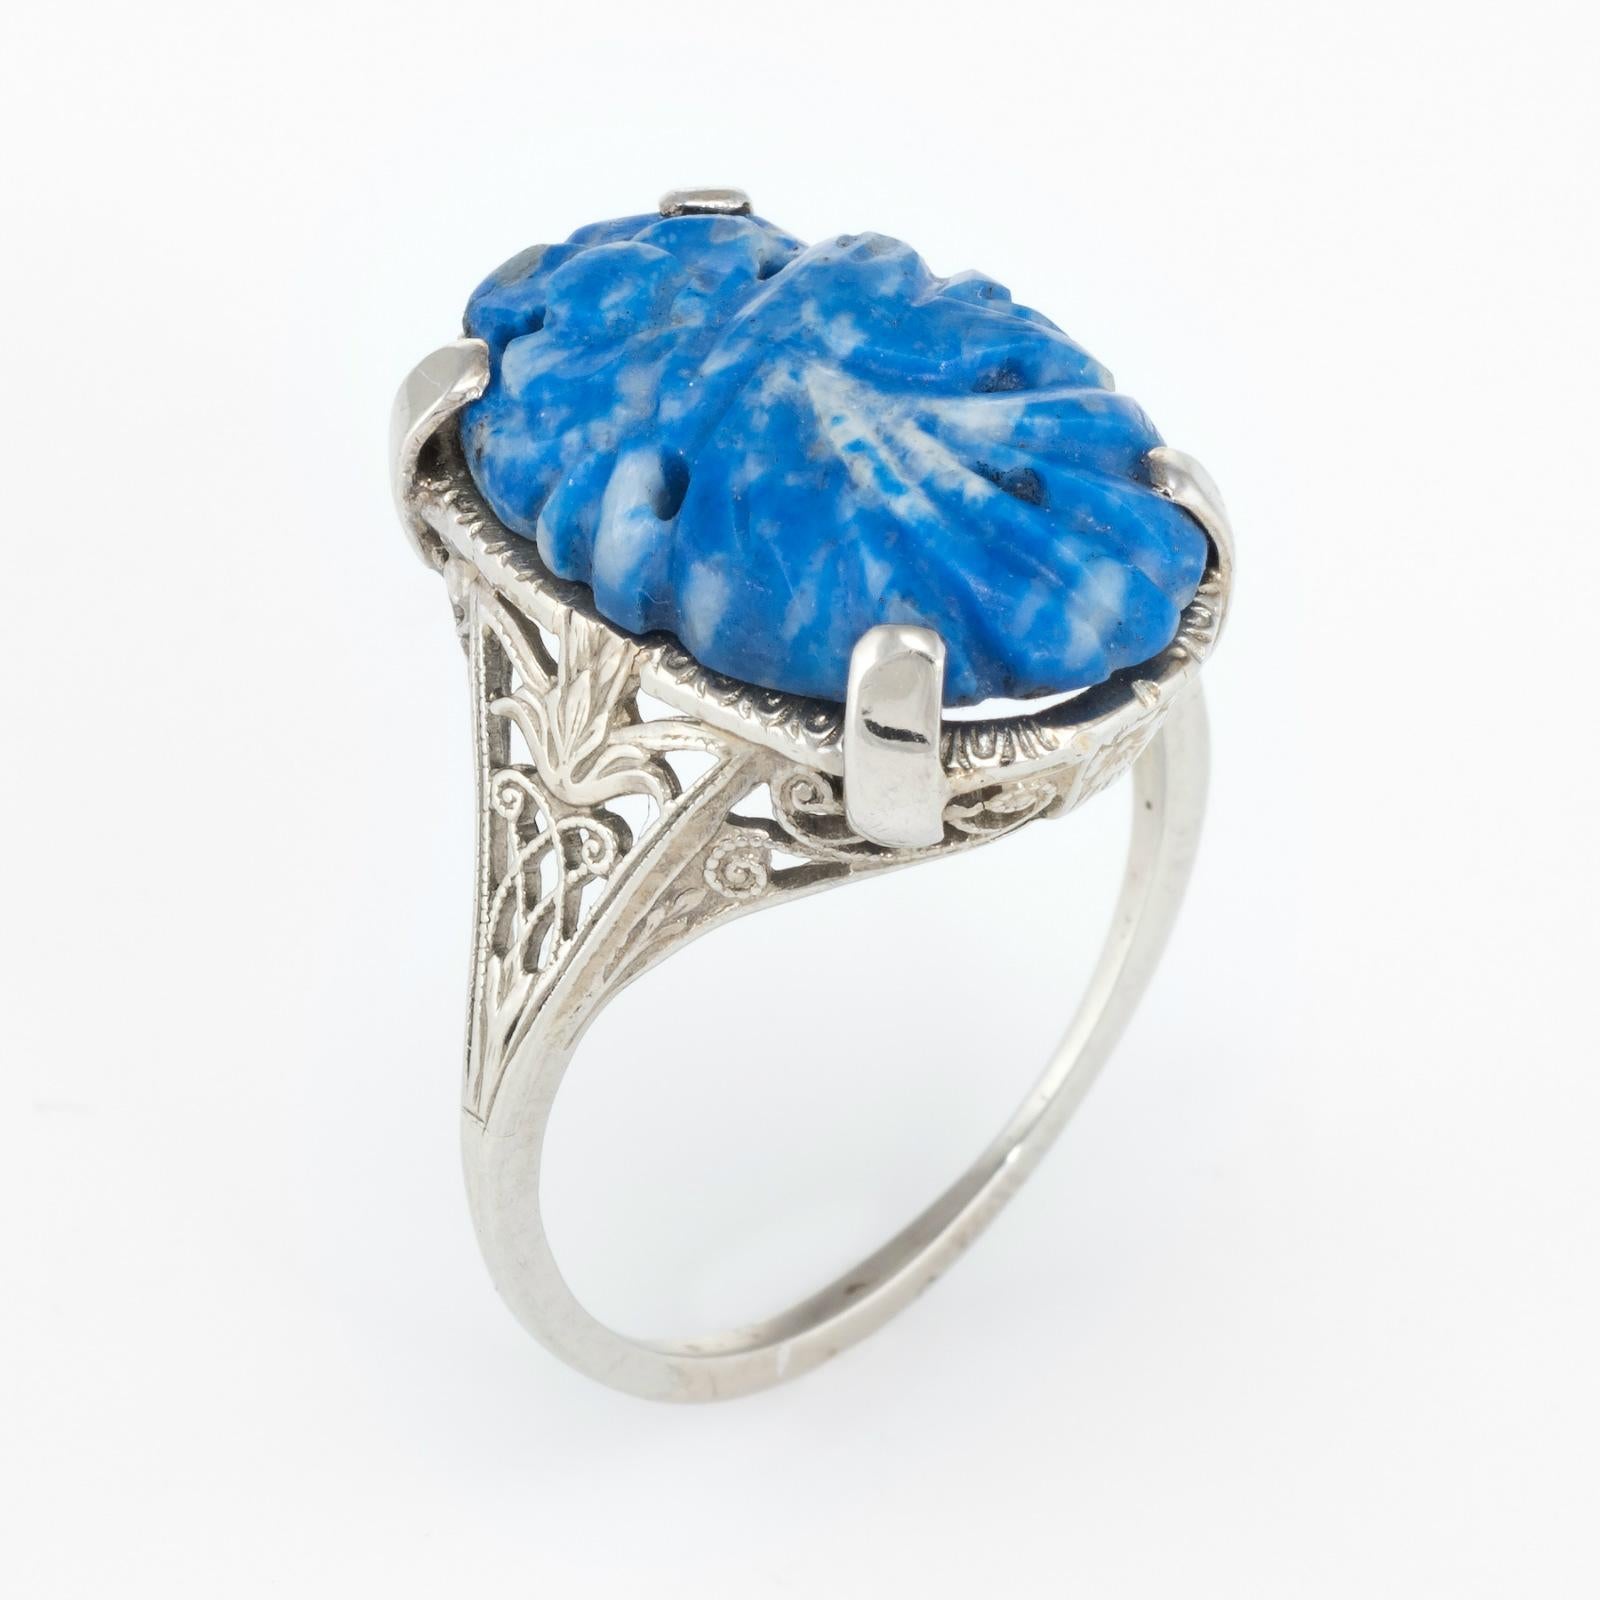 Elegant Art Deco era ring (circa 1920s to 1930s), crafted in 14 karat white gold. 

Sodalite is carved in a floral motif and measures 18.5mm x 12.75mm. The sodalite is in excellent condition and free of cracks or chips.  

The ring is in excellent